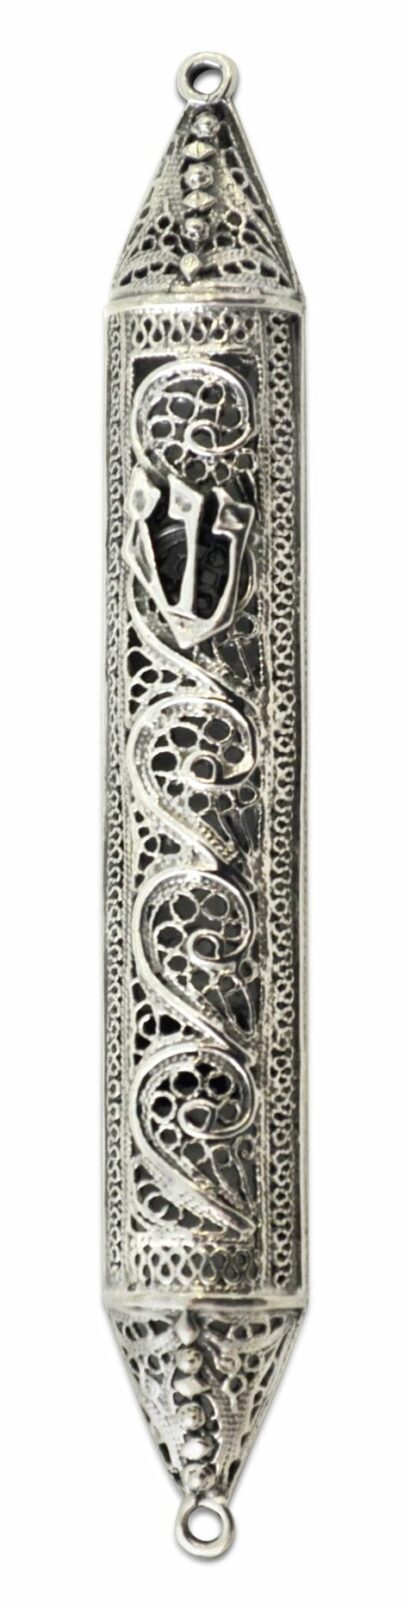 Small Sterling Silver Mezuzah Case